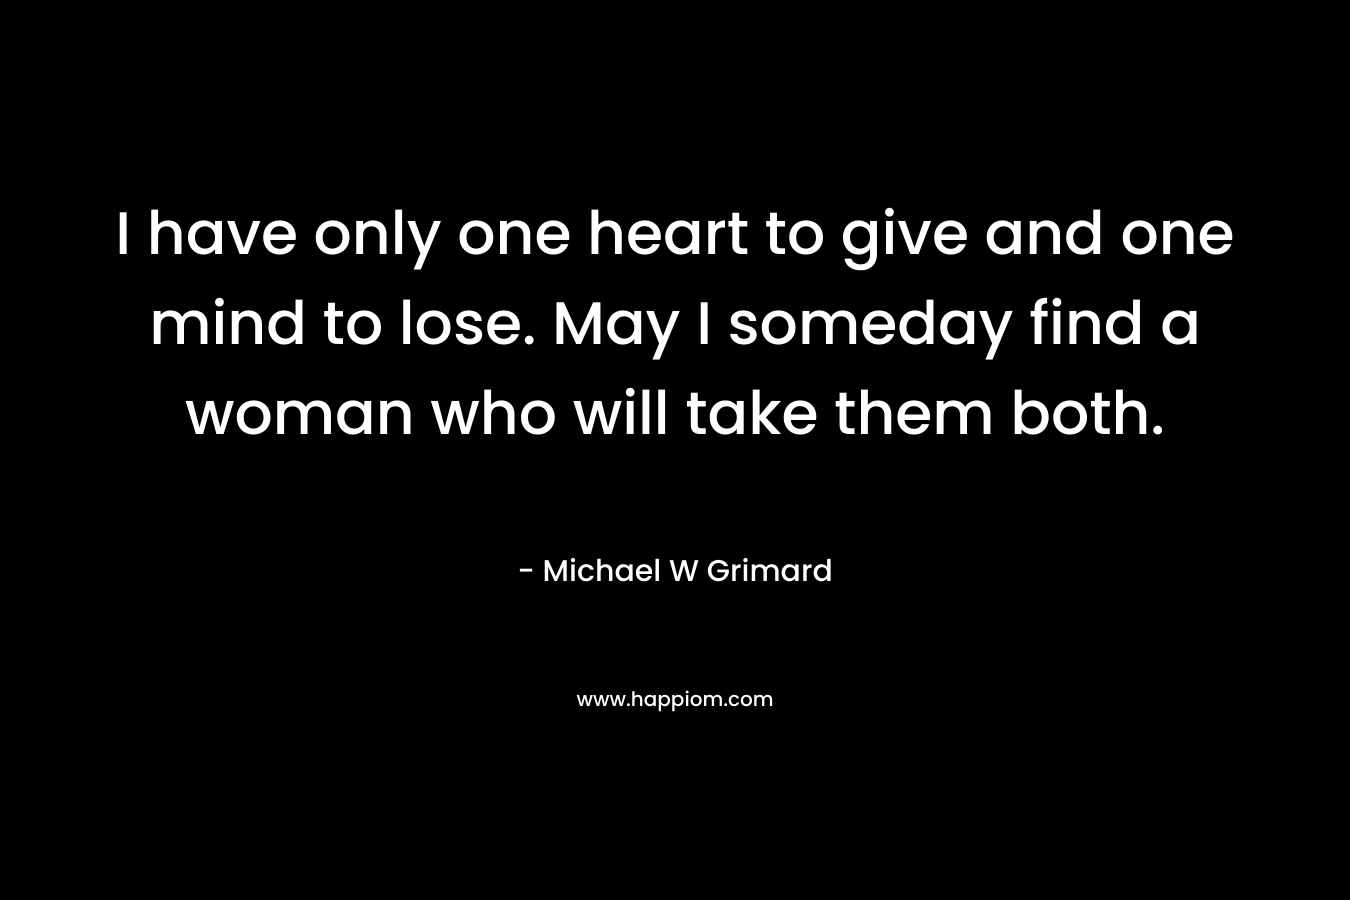 I have only one heart to give and one mind to lose. May I someday find a woman who will take them both.